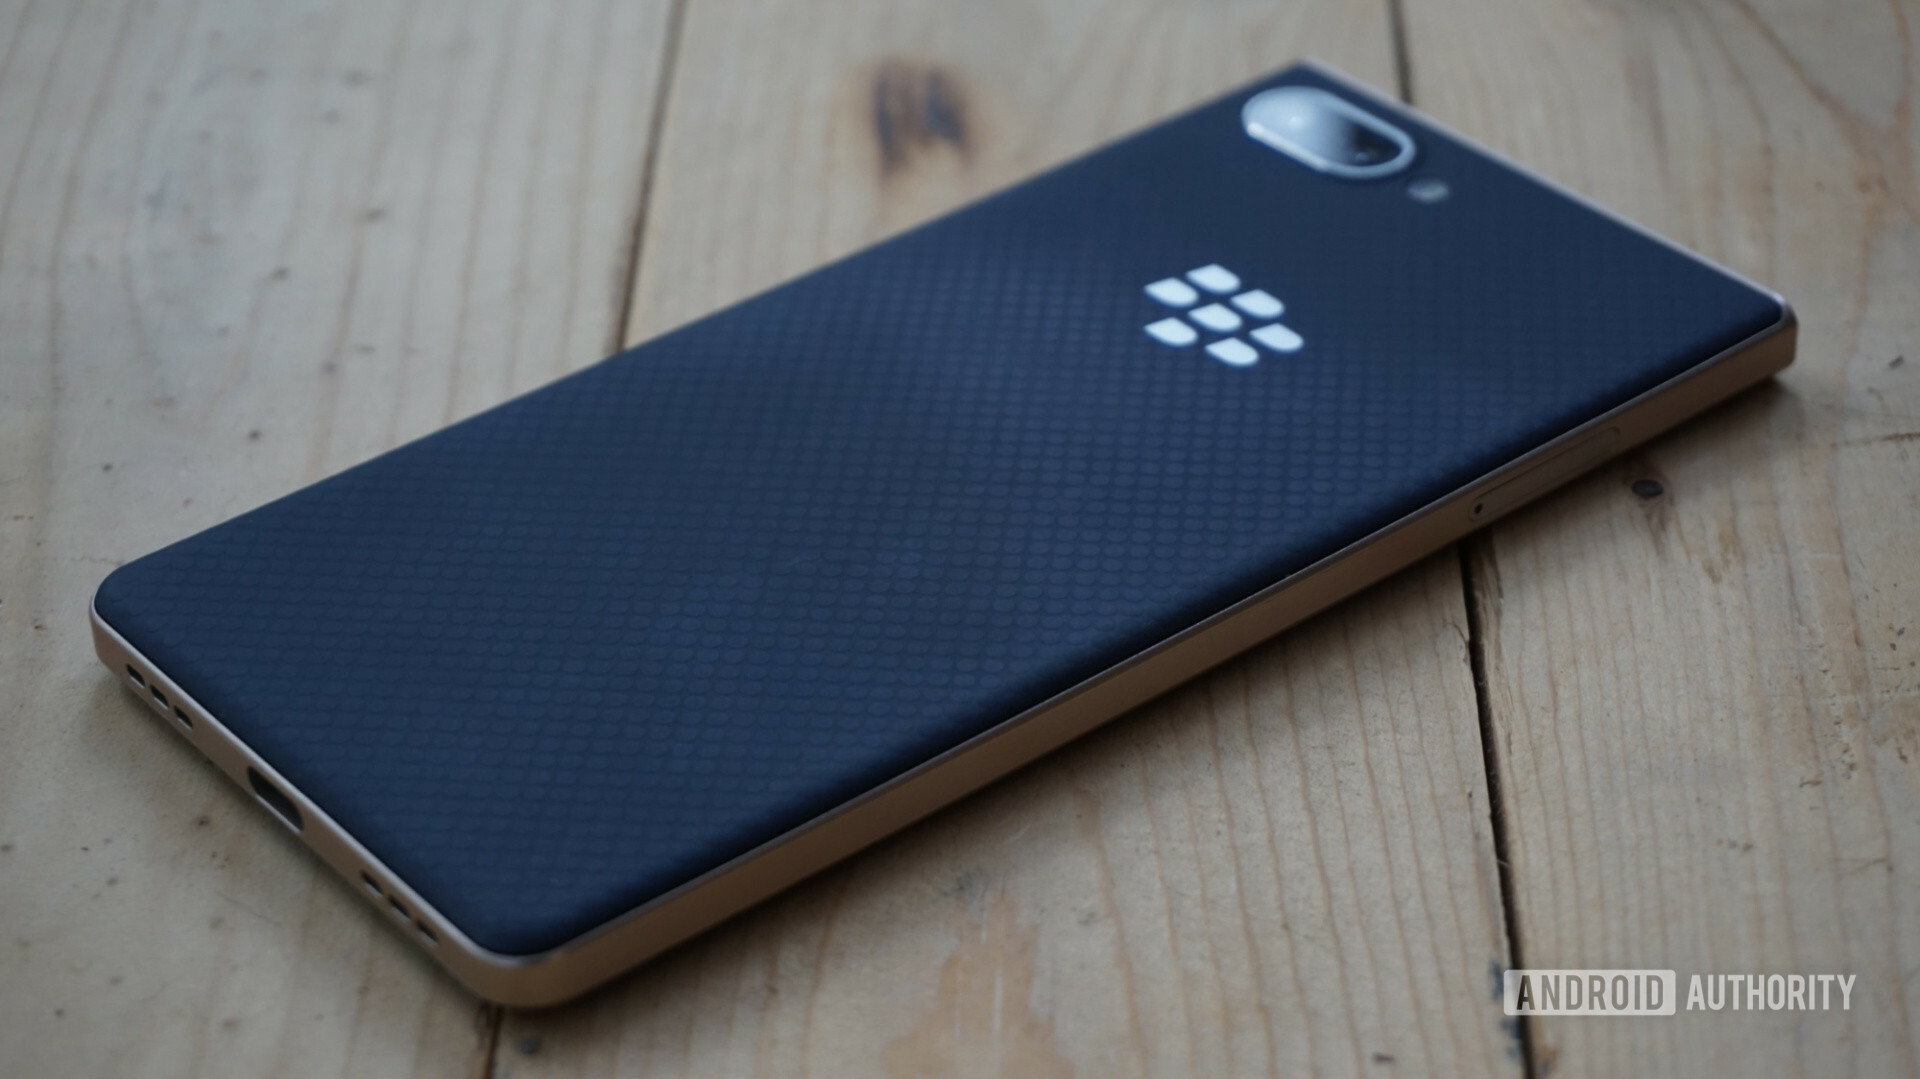 Back side of the BlackBerry Key2 LE on a wood table.